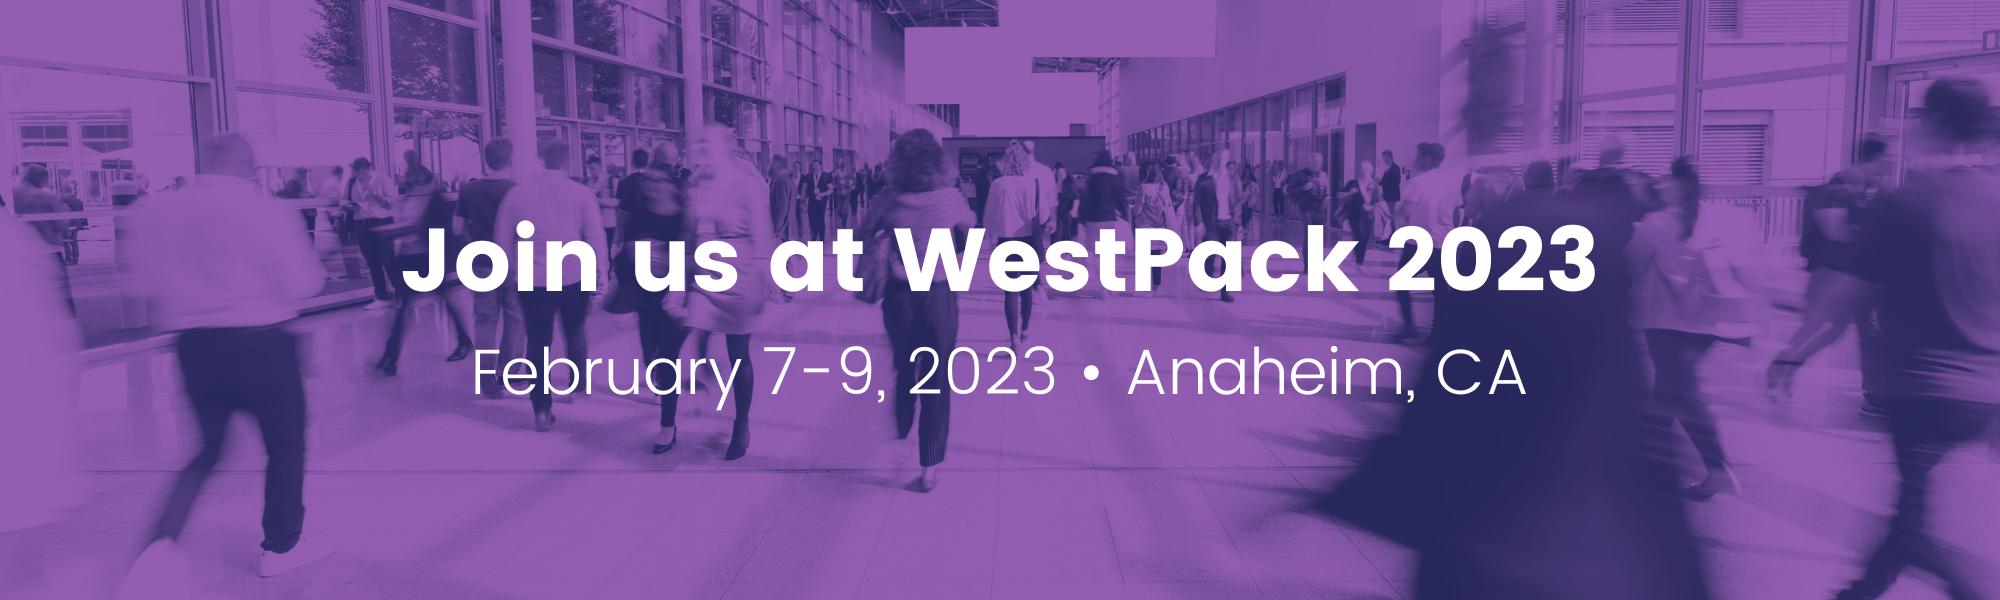 Text: Join us at WestPack 2023. February 7-9, 2023. Anaheim California